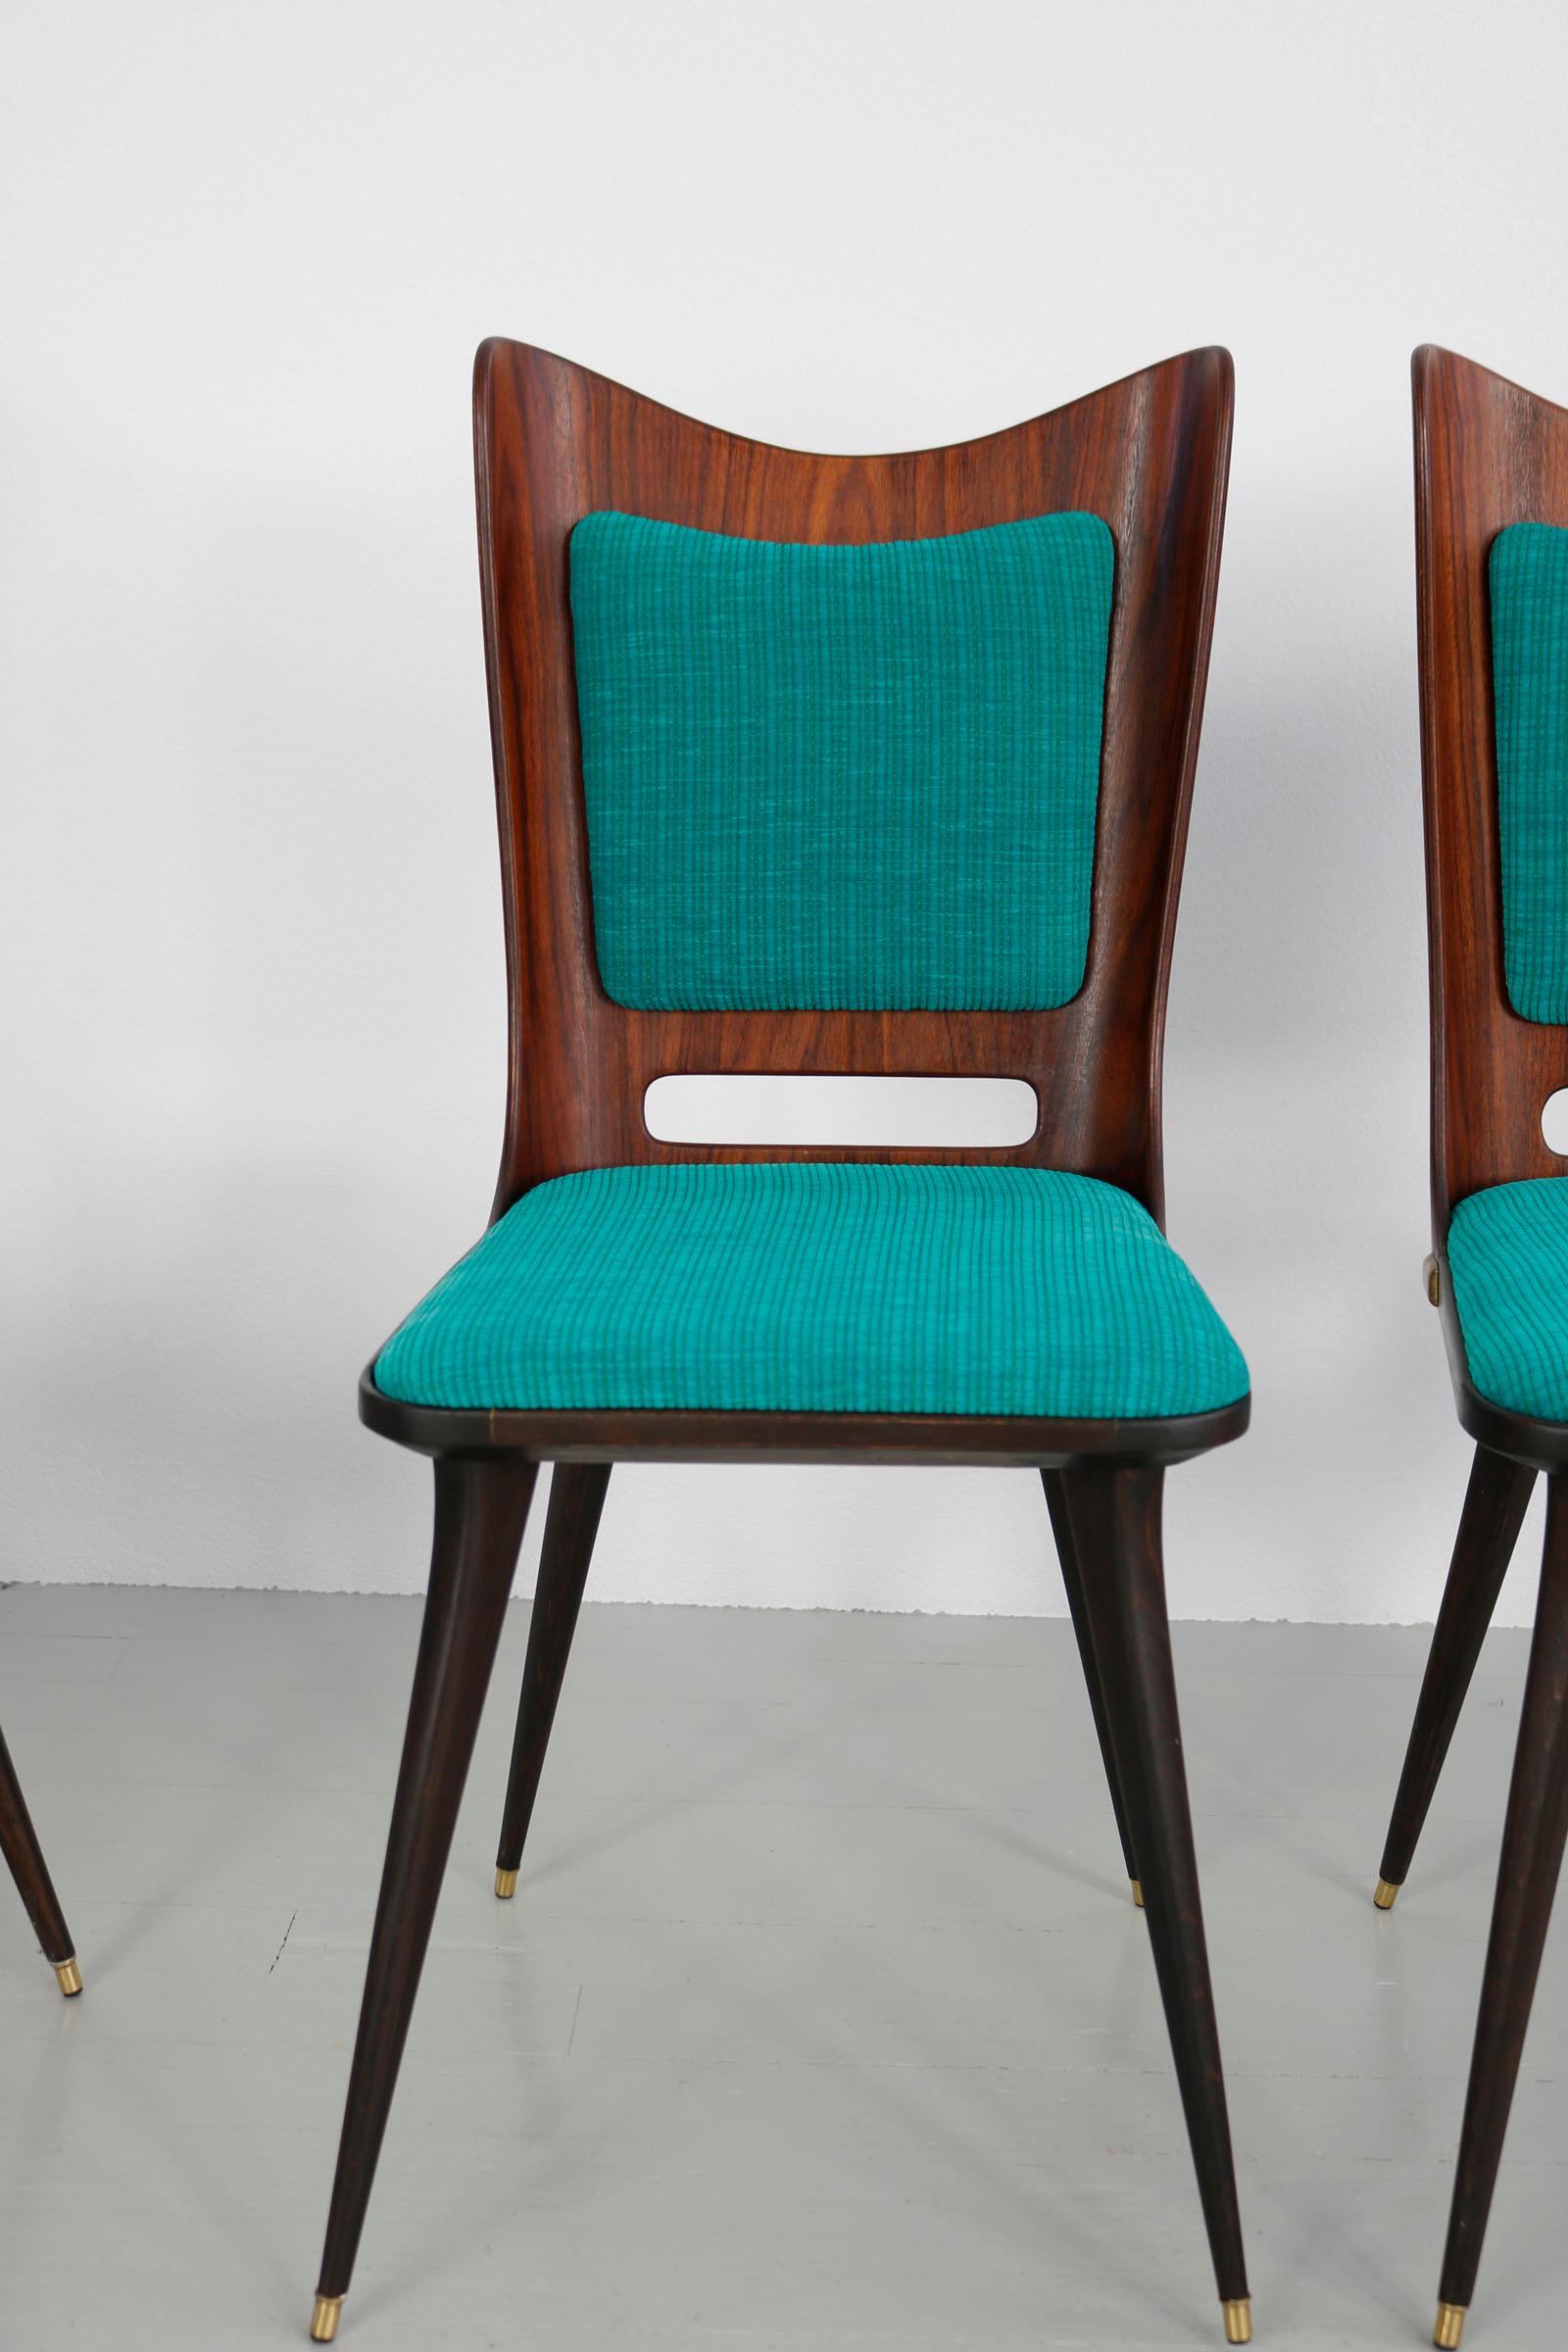 Set of Six Wooden Dining Chairs with Green Upholstery, 1950s For Sale 7